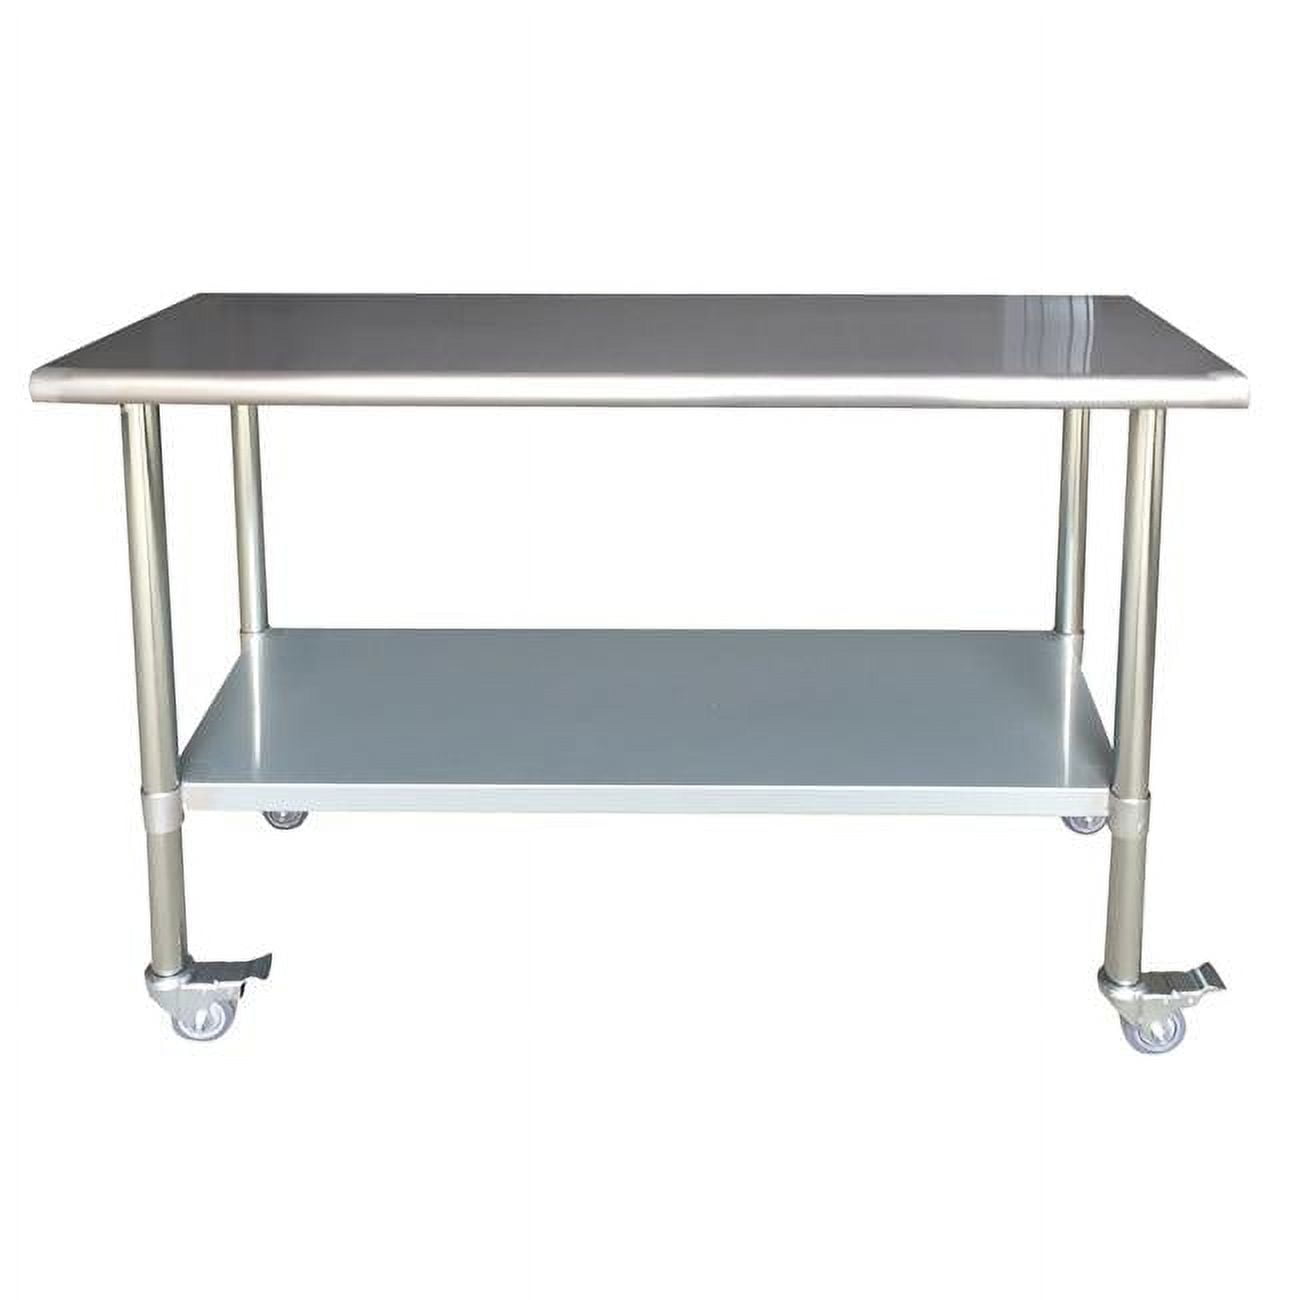 Picture of Sportsman Series SSWTWC60 24 x 60 in. Stainless Steel Work Table with Casters